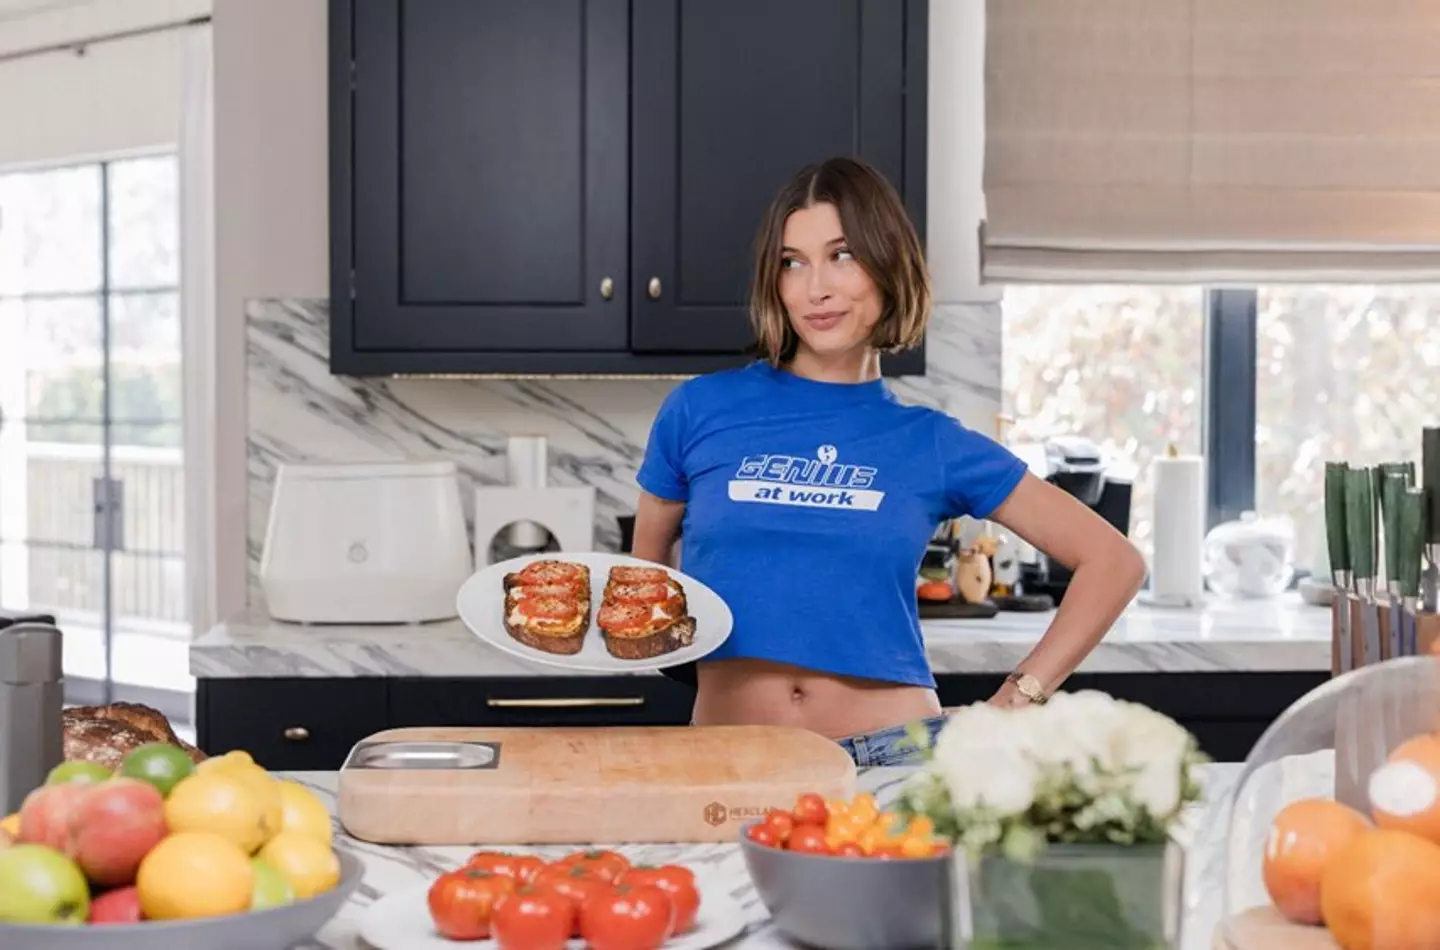 Fans are accusing Hailey Bieber of 'copying' Selena Gomez over the cooking show.